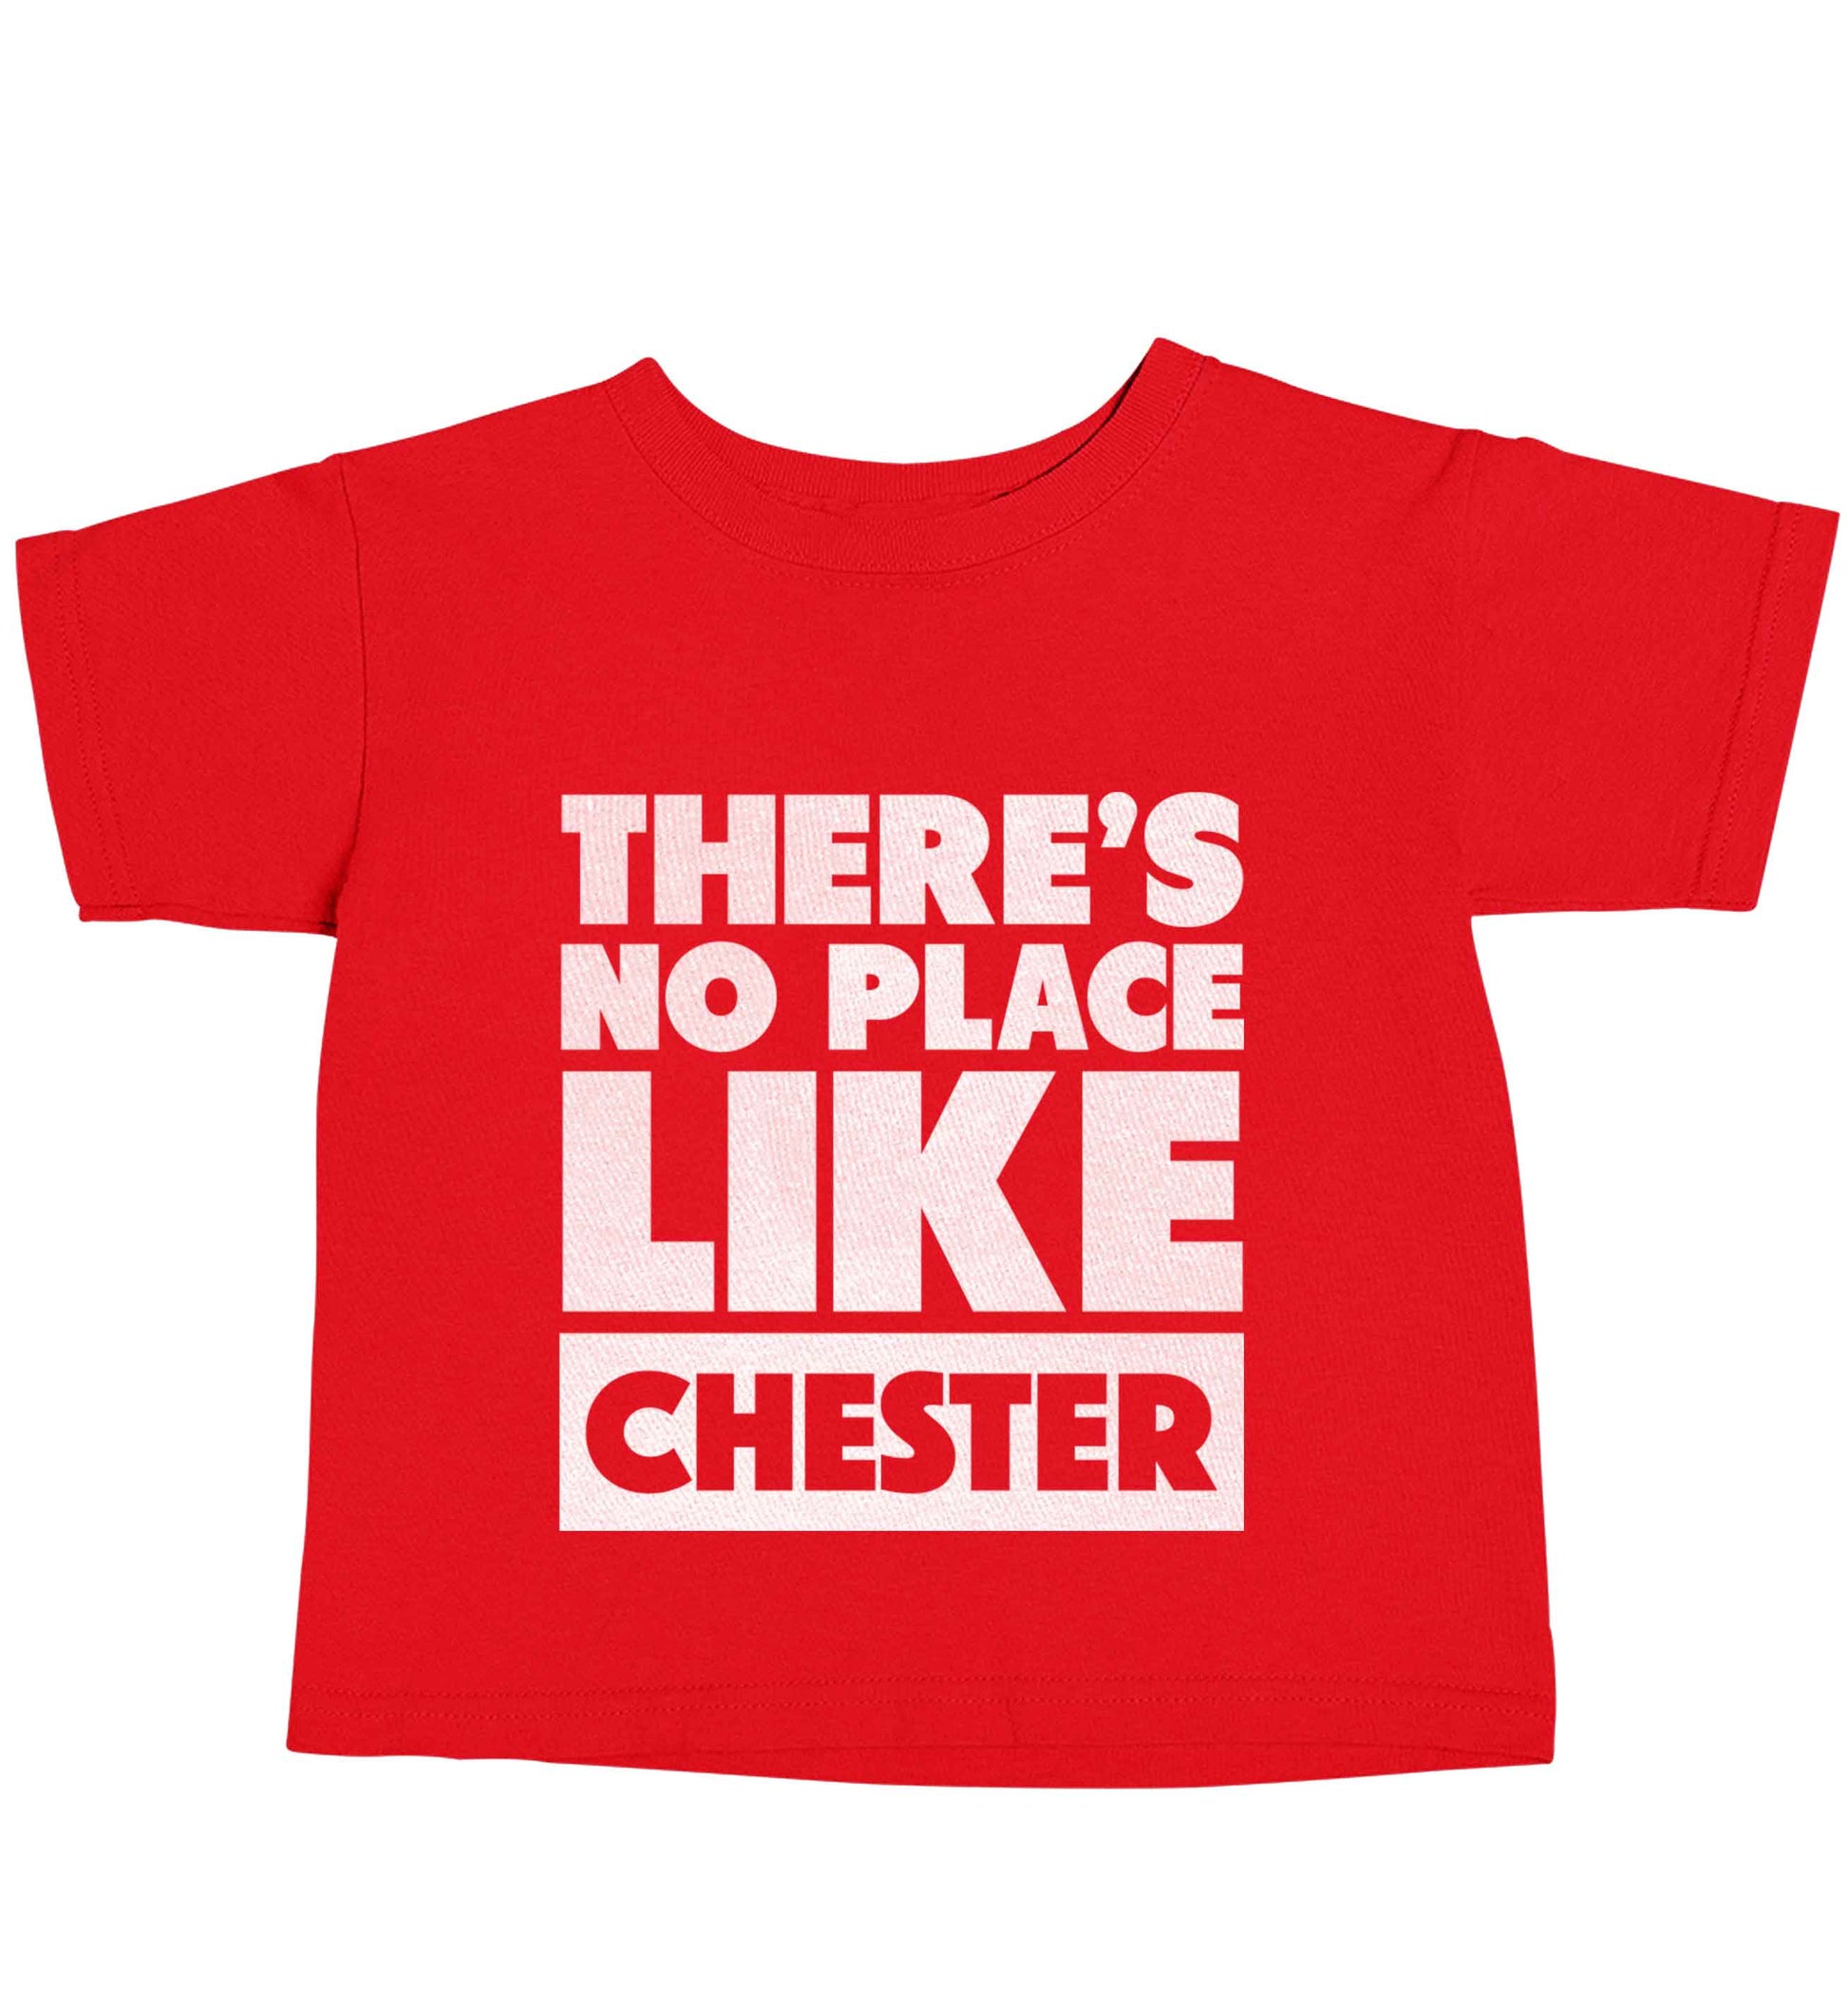 There's no place like Chester red baby toddler Tshirt 2 Years